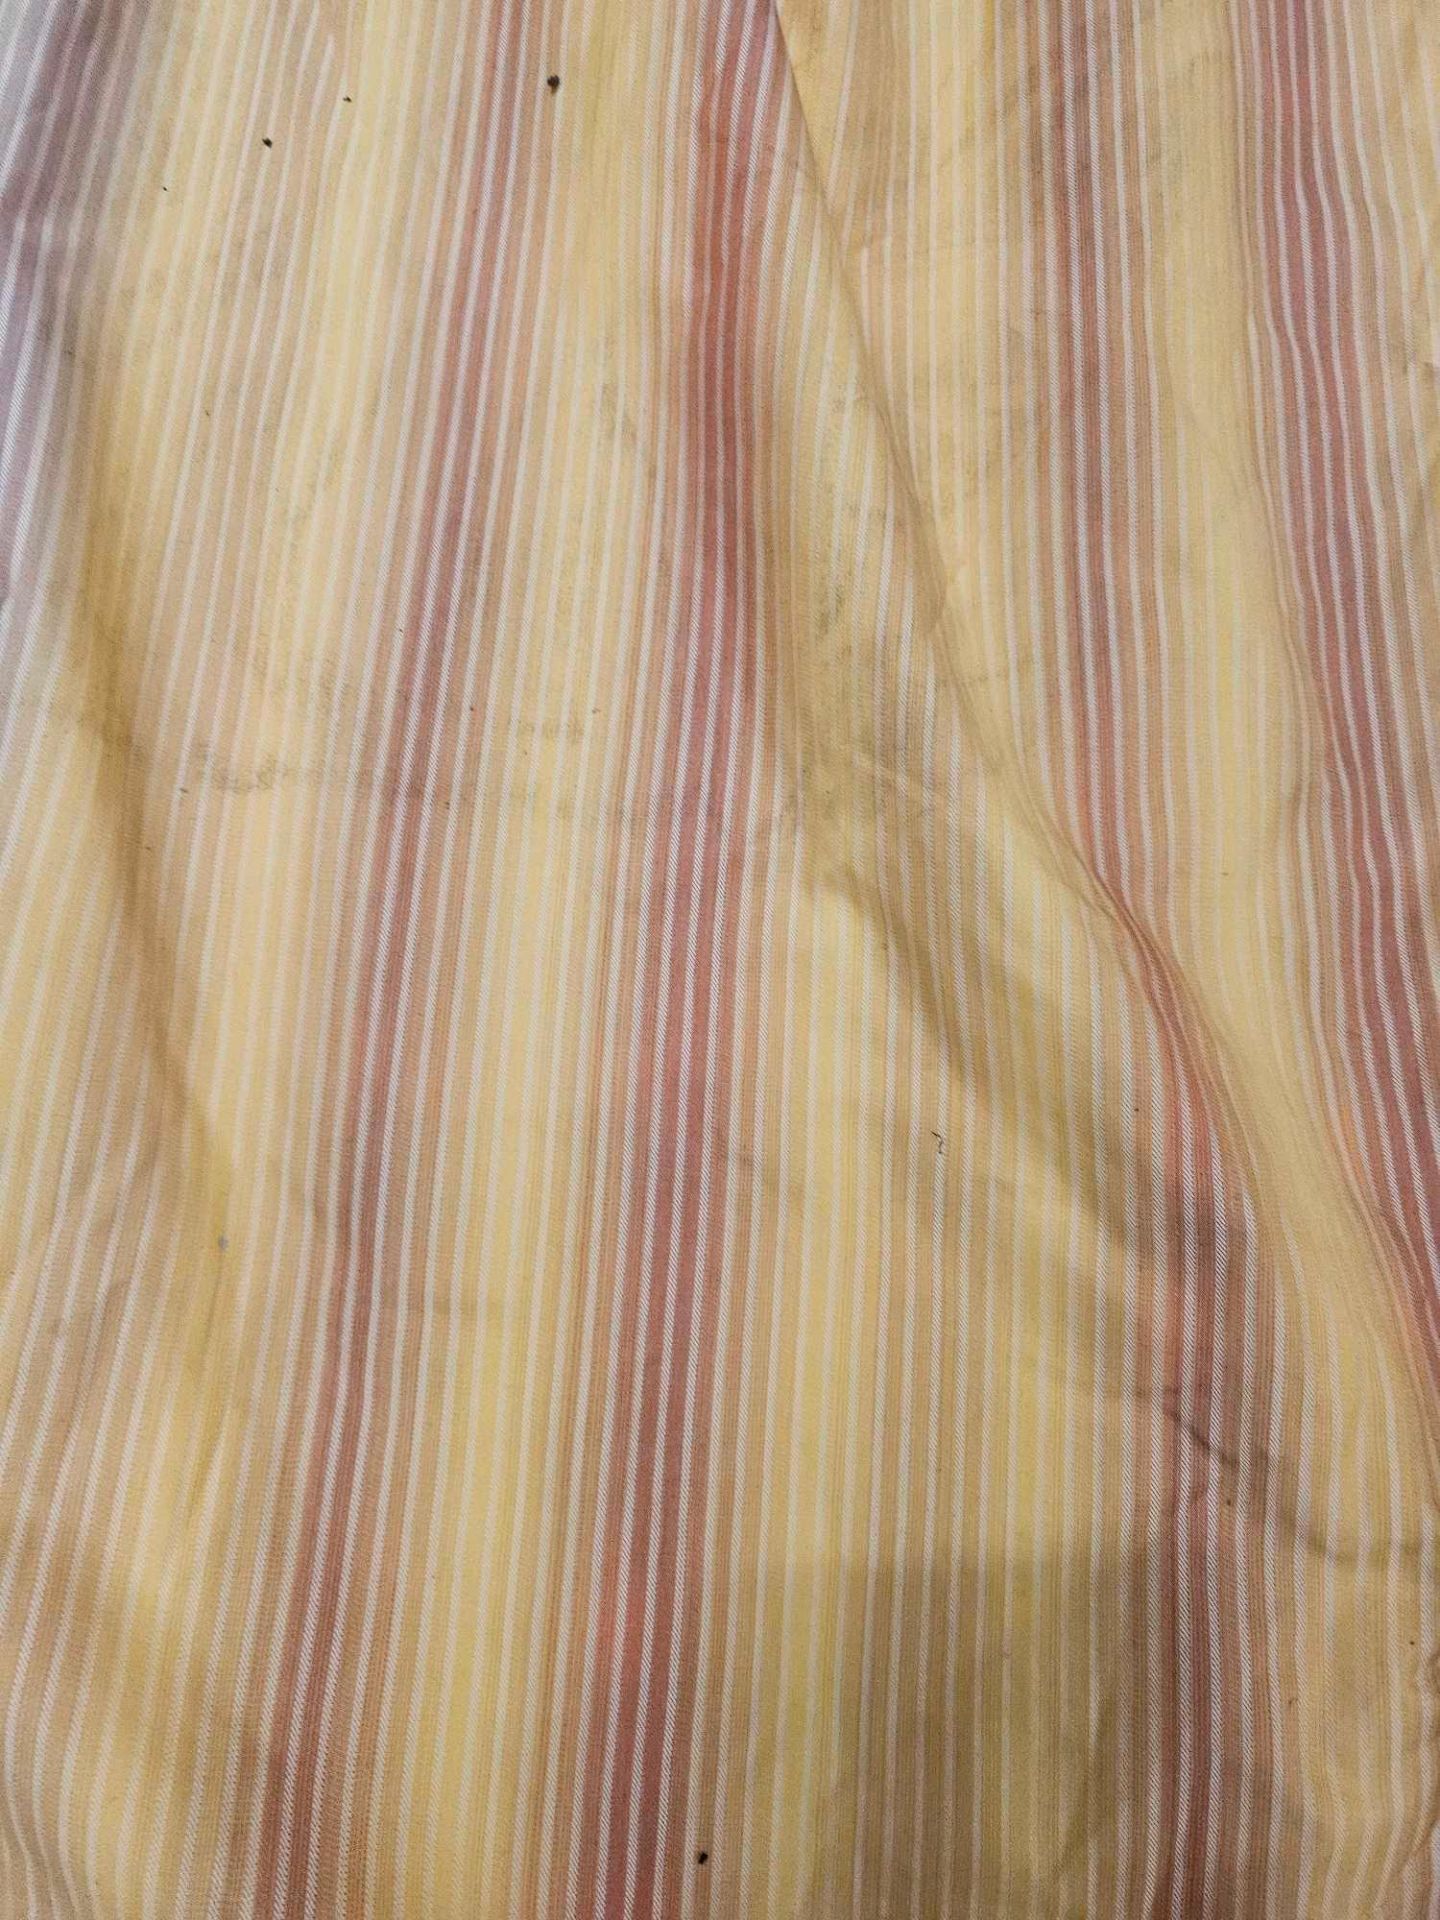 Single Silk Striped Curtain Pink /Black Size 60 x 215cm Single Silk Curtain Yellow/Red Stripes - Image 5 of 7